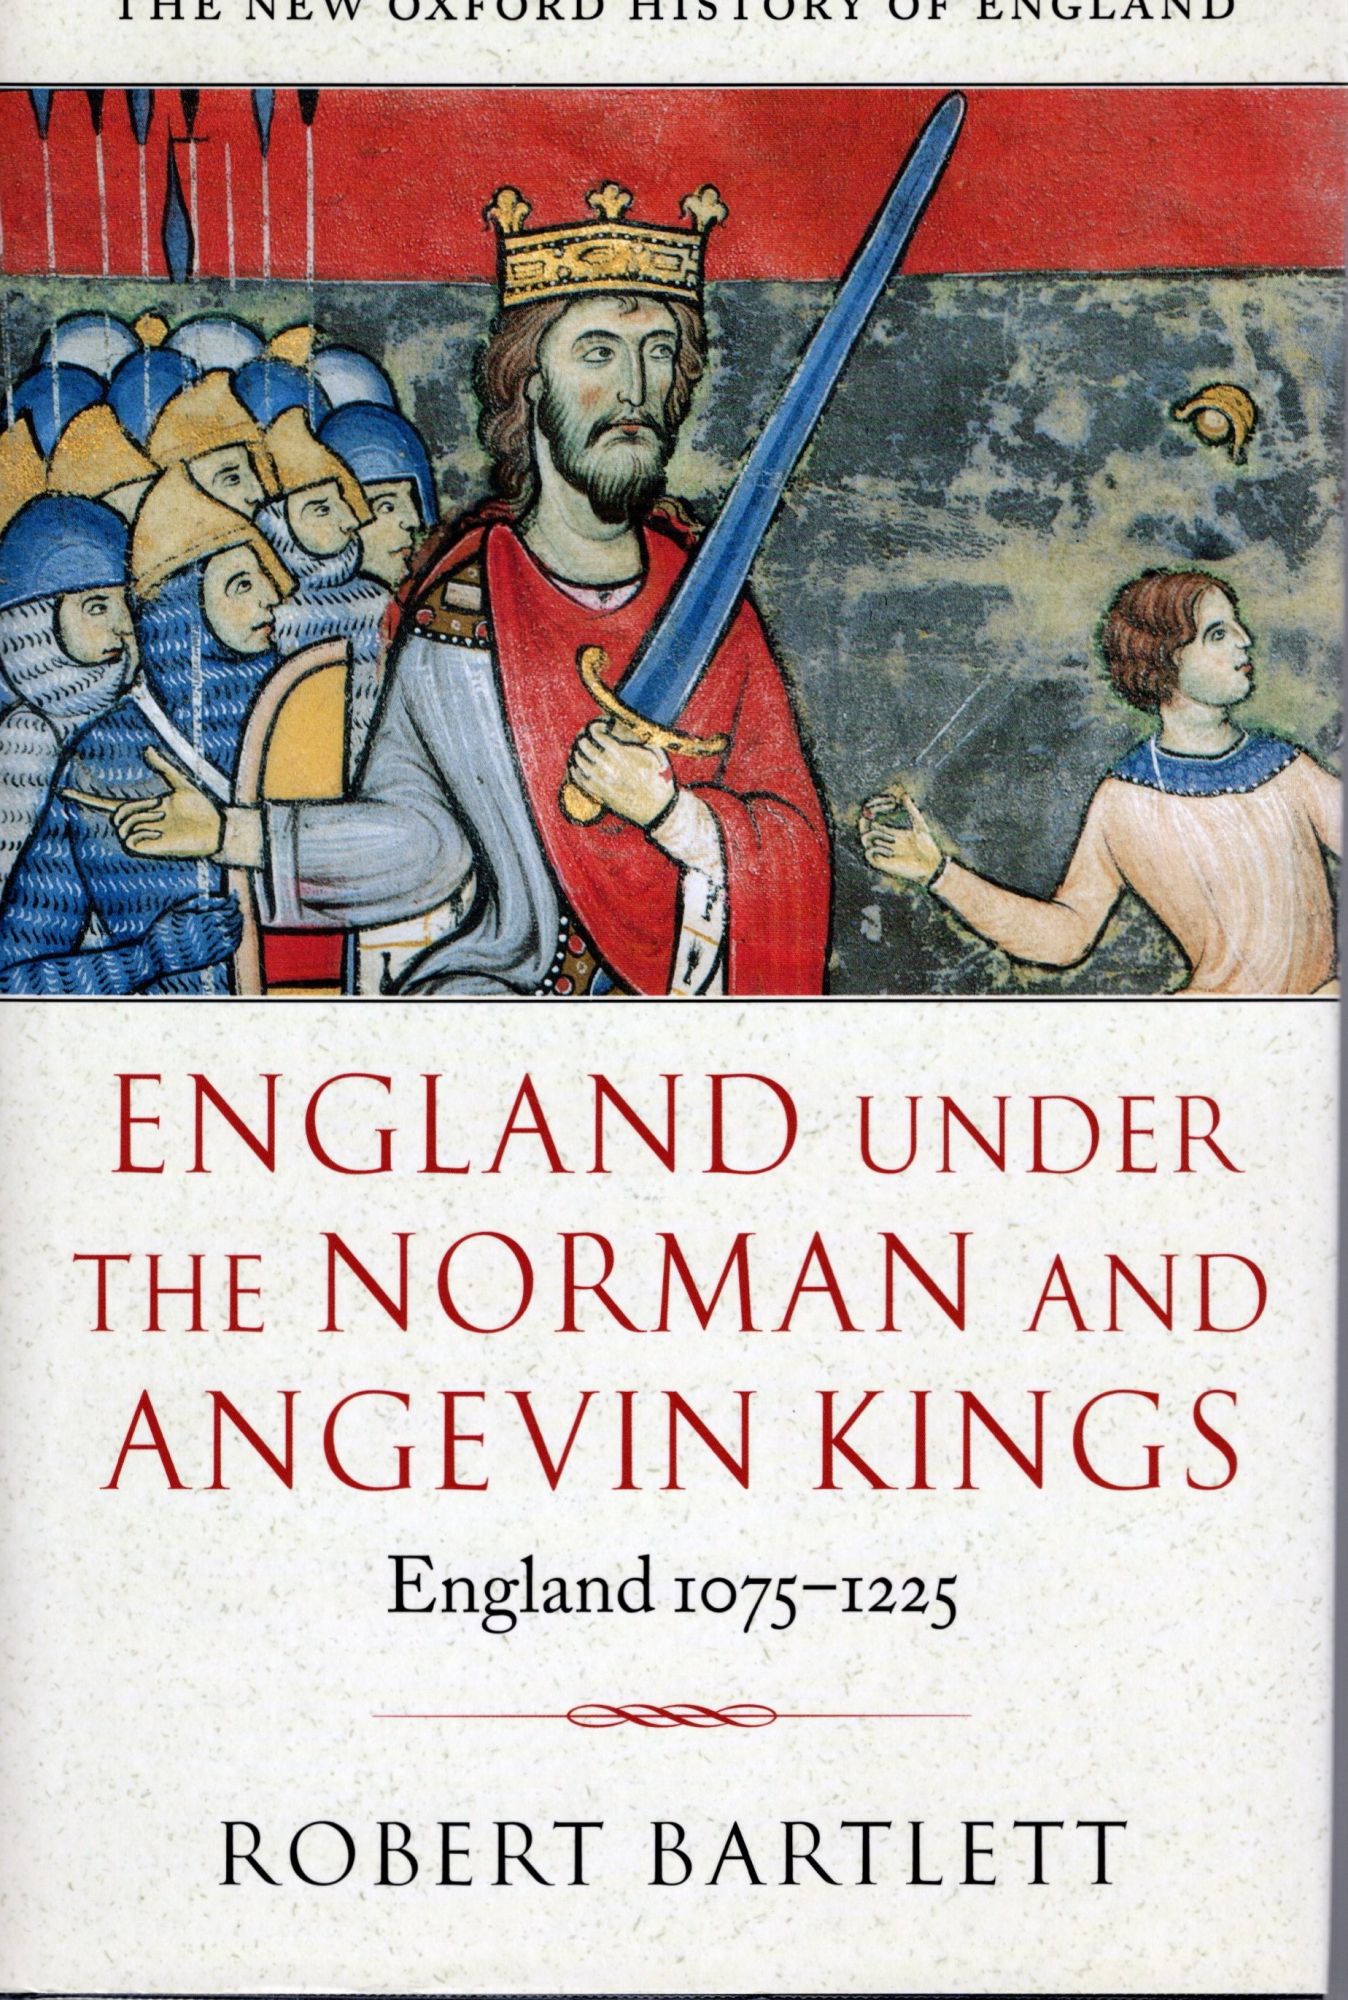 ENGLAND UNDER THE NORMAN AND ANGEVIN KINGS 1075 - 1225 - Bartlett, Robert